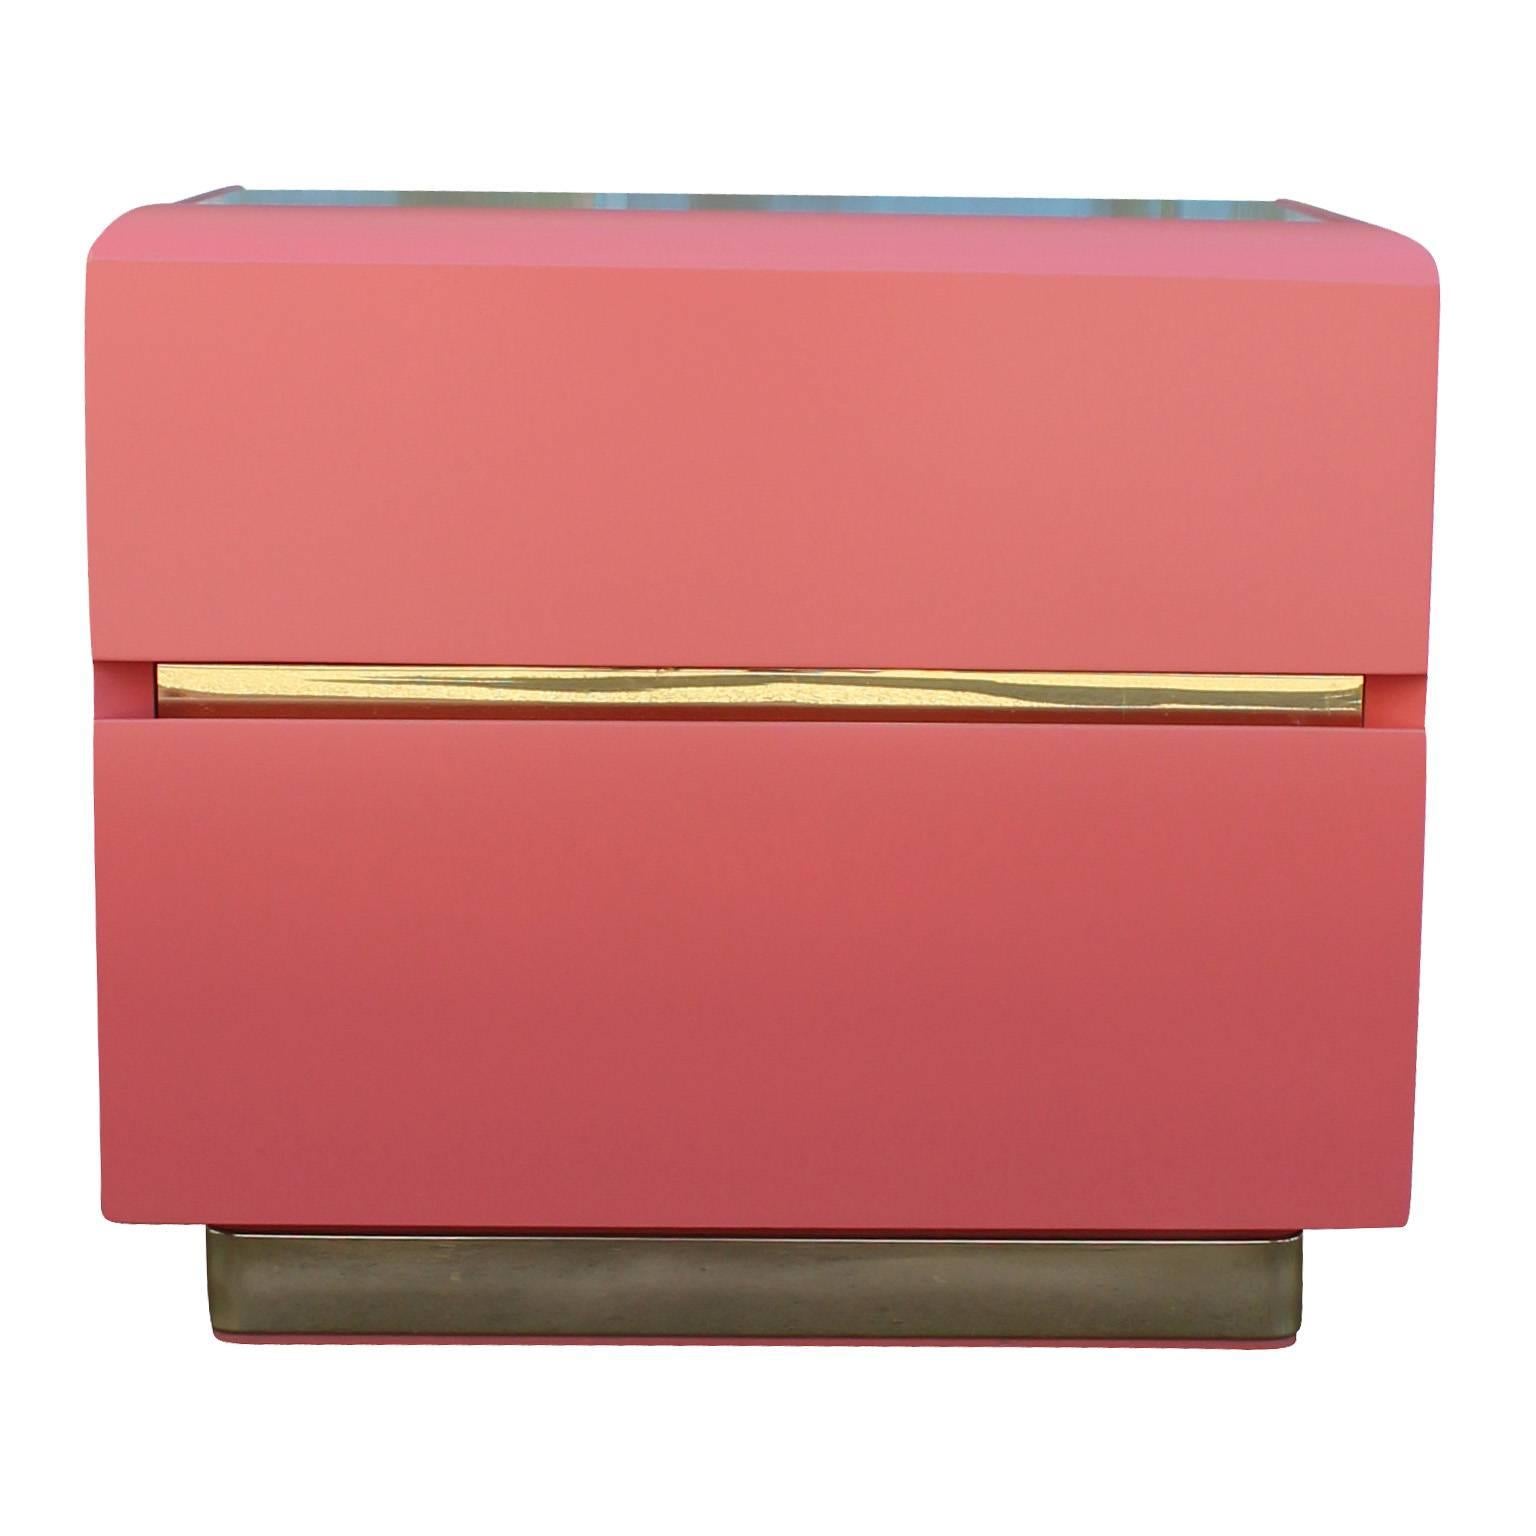 Ultra luxe pair of nightstands or end tables. Nightstands are freshly lacquered in a coral pink. Shiny brass adds visual interest to the bases and in between drawers. In excellent condition.